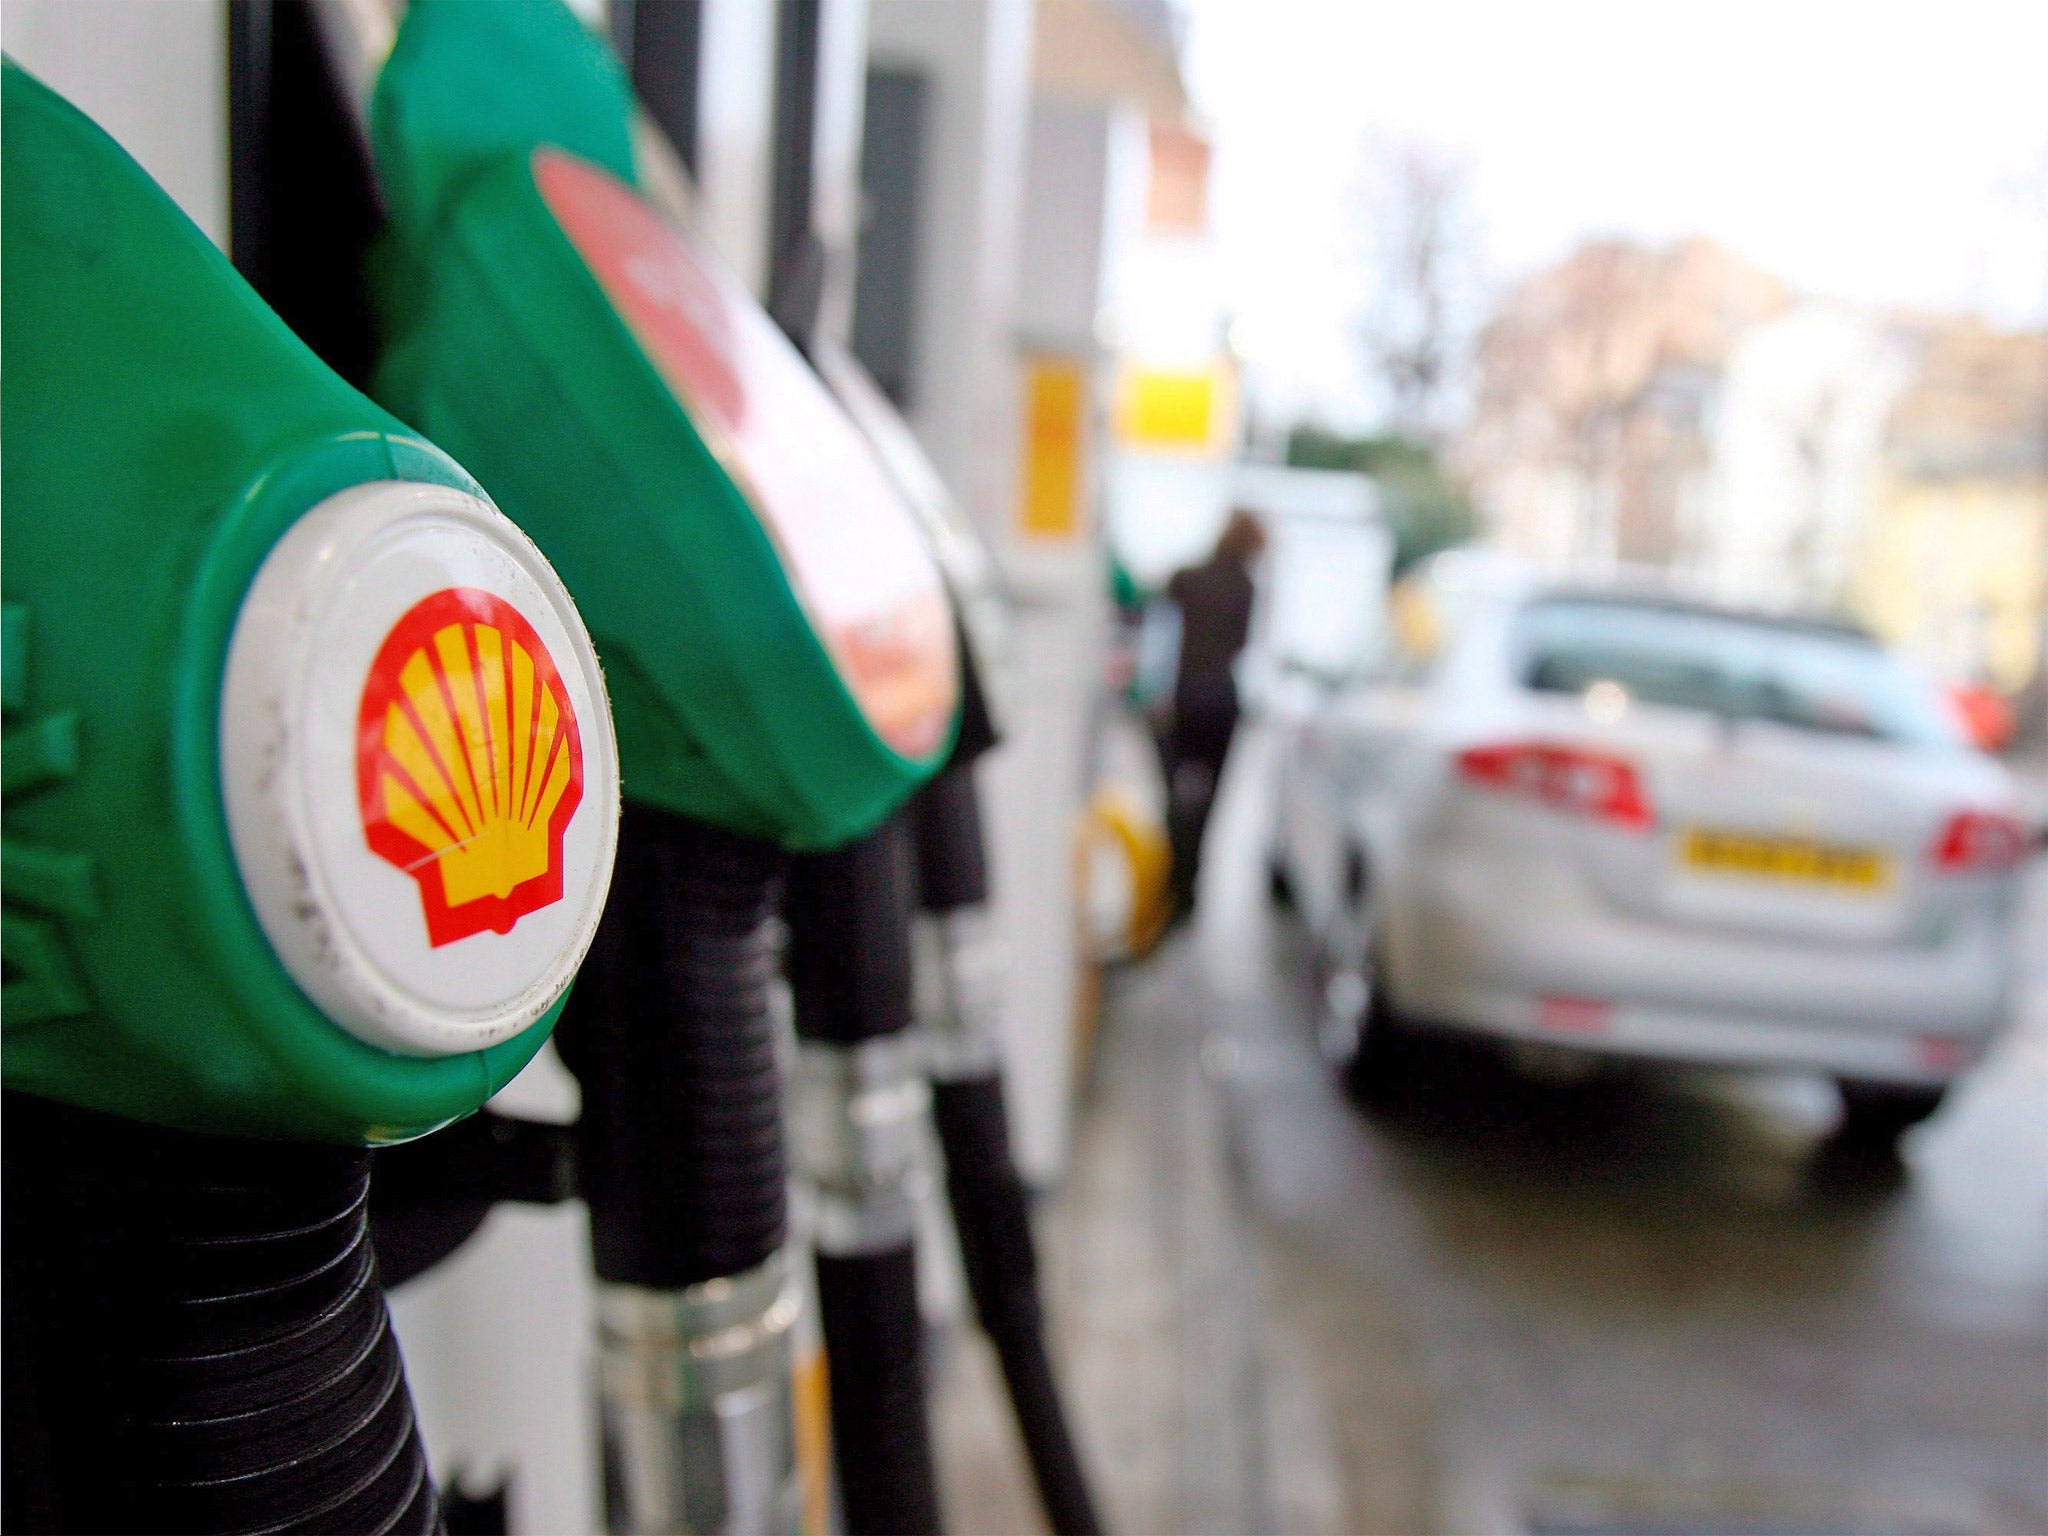 A petrol pump price war saw 4.9p cut from a litre of fuel